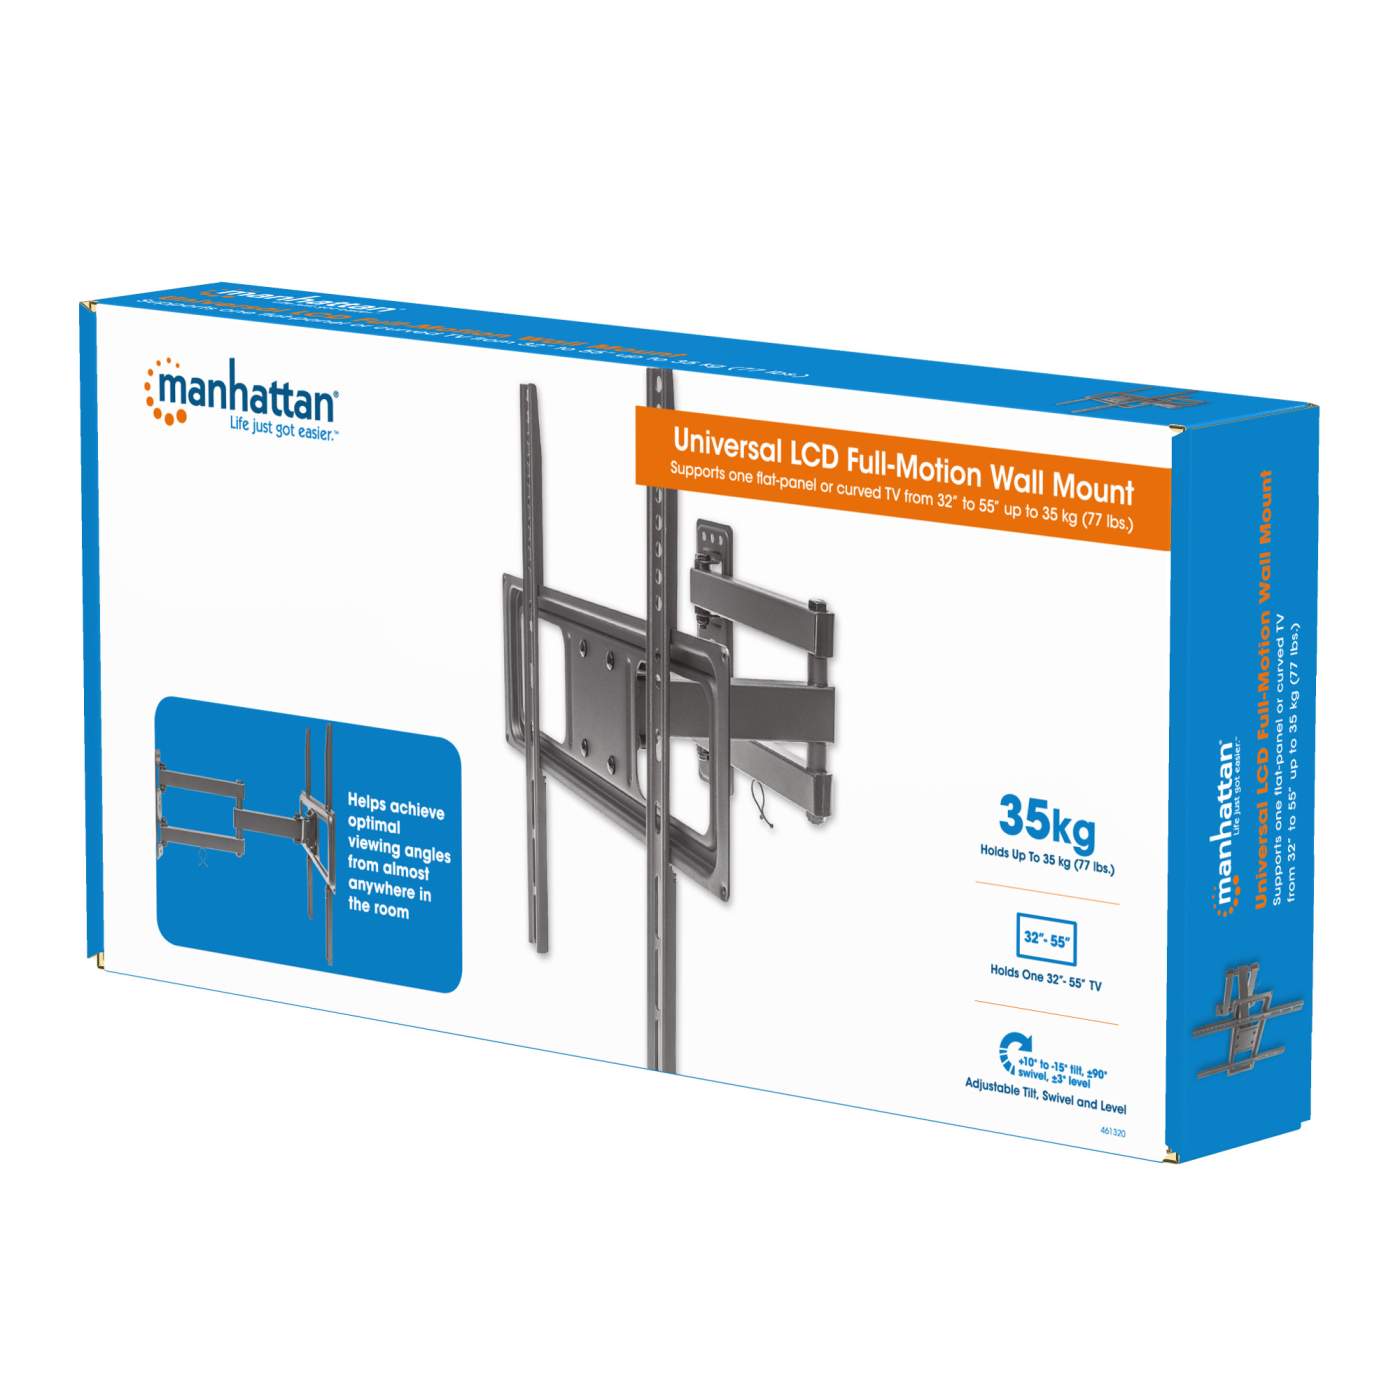 Universal Basic LCD Full-Motion Wall Mount Packaging Image 2